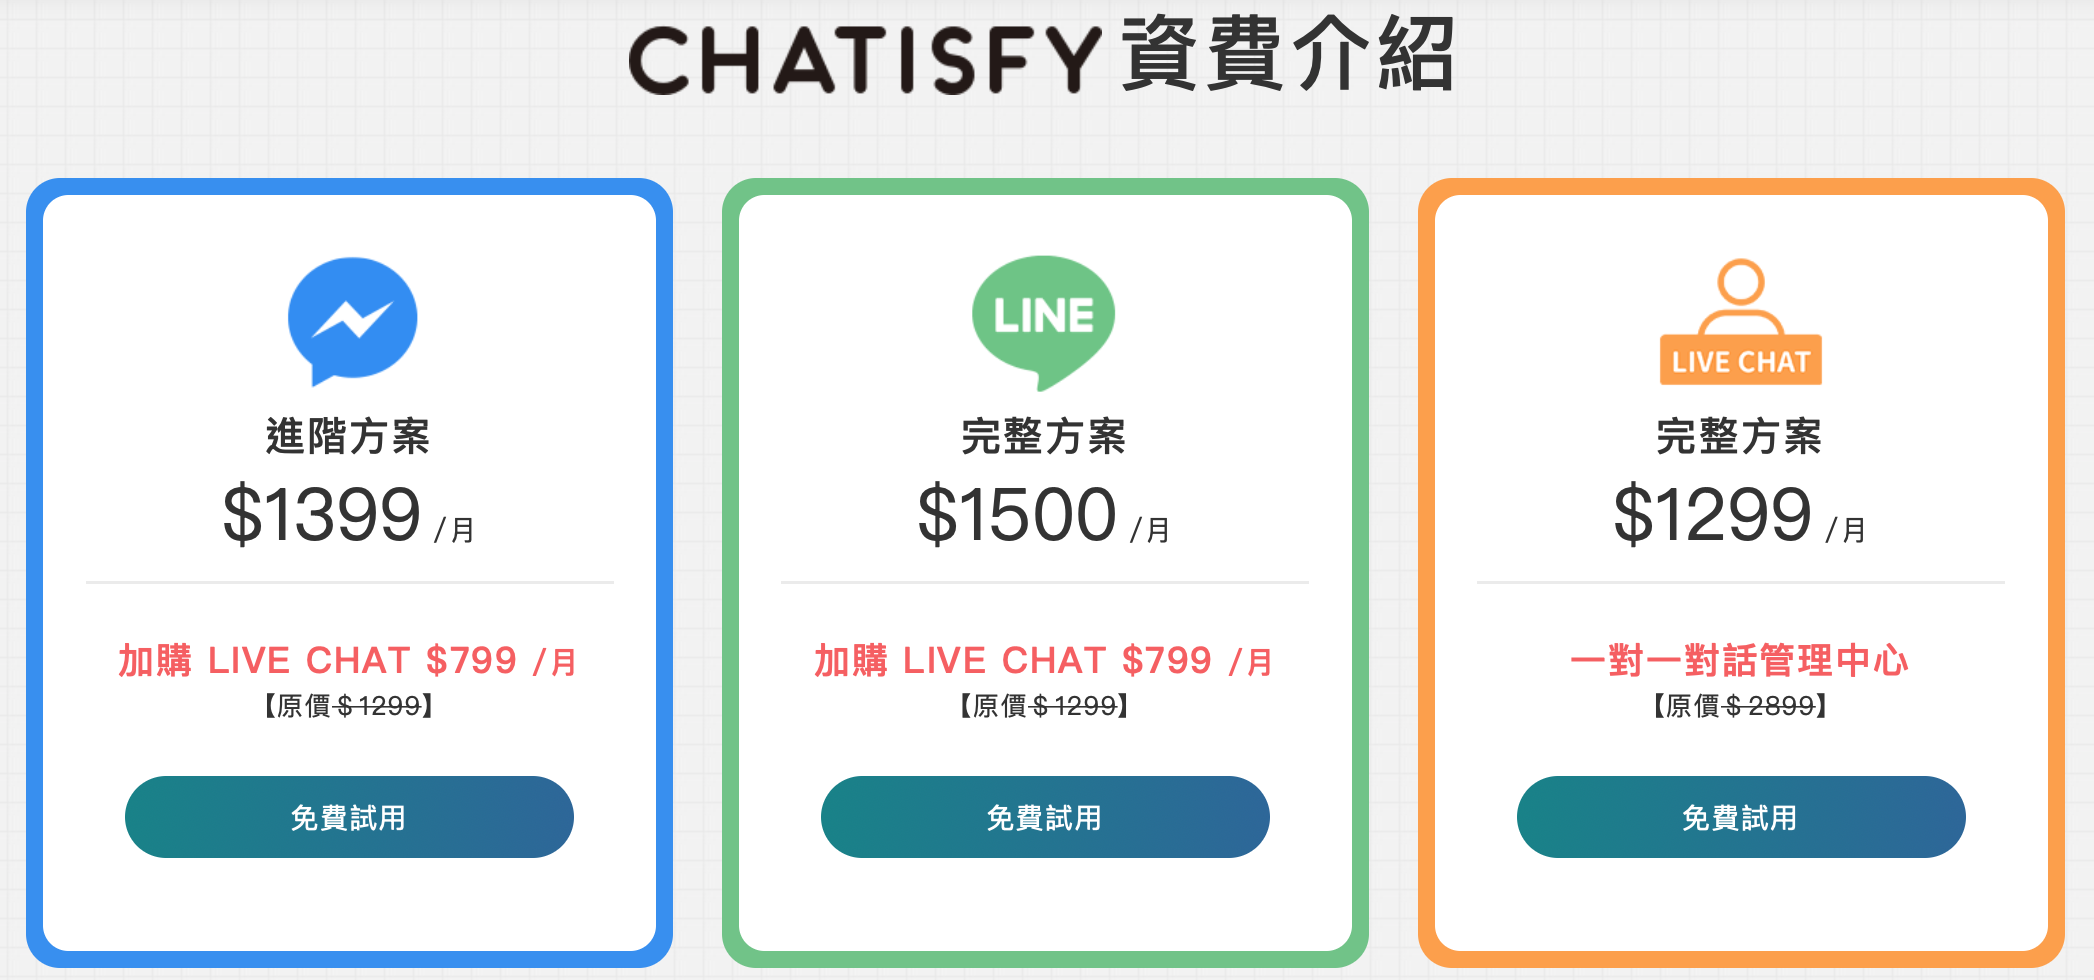 Chatisfy方案價格費用